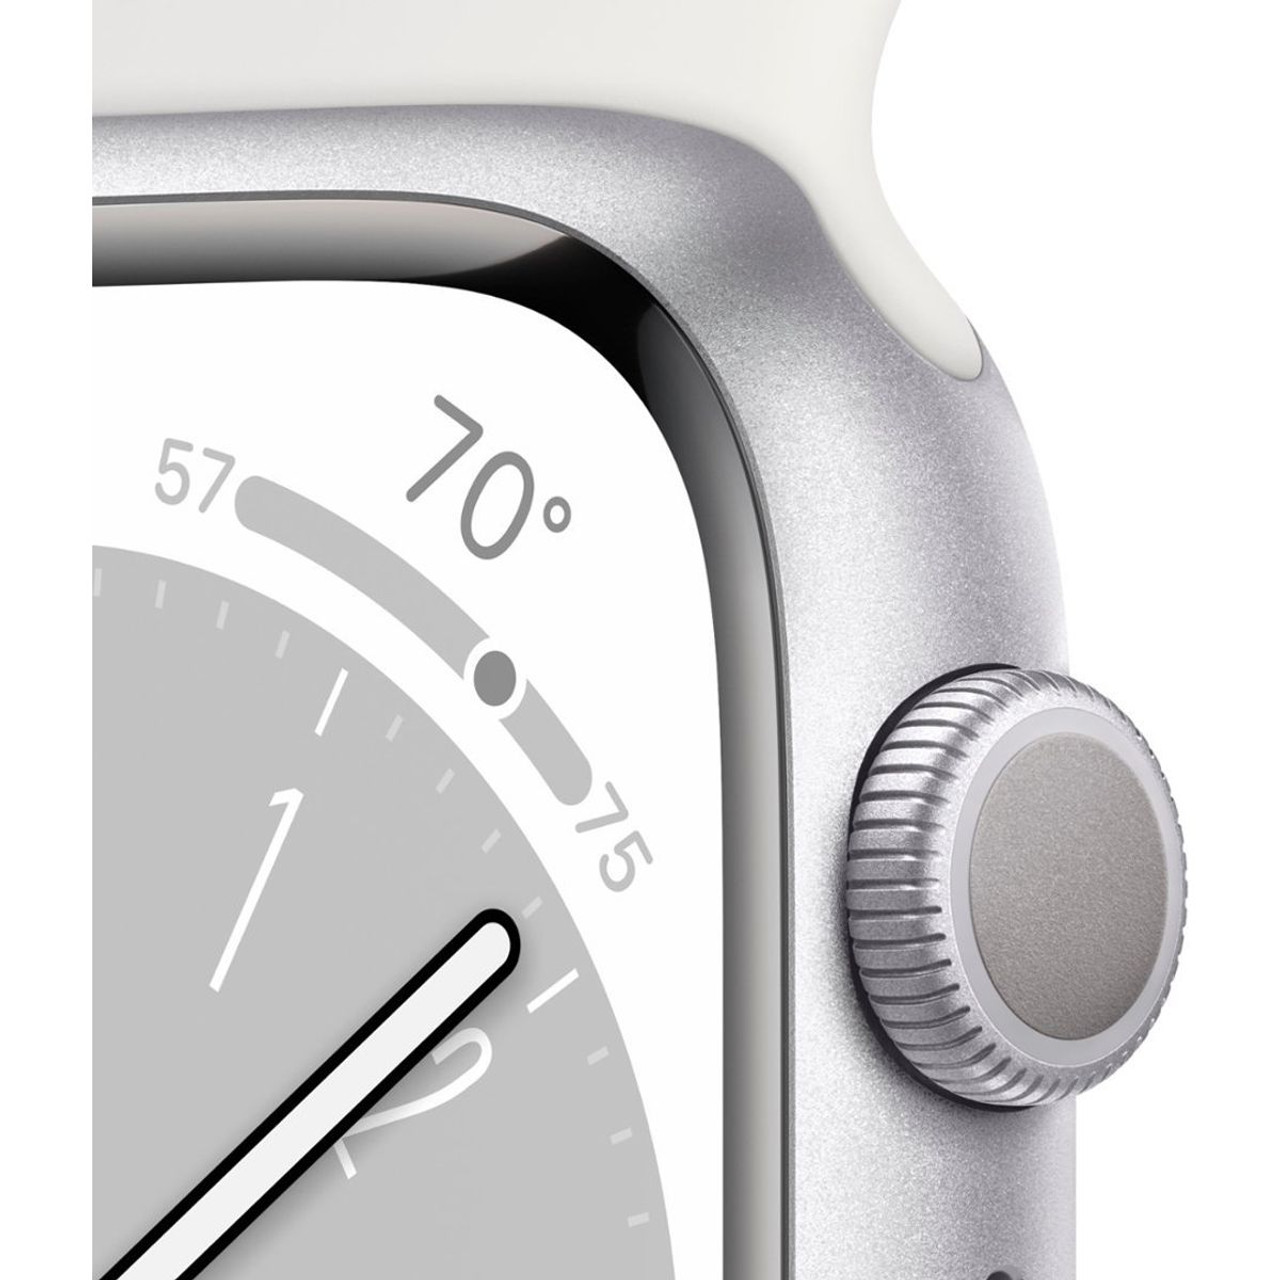 Apple Watch S8, Silver Aluminum Case  product image